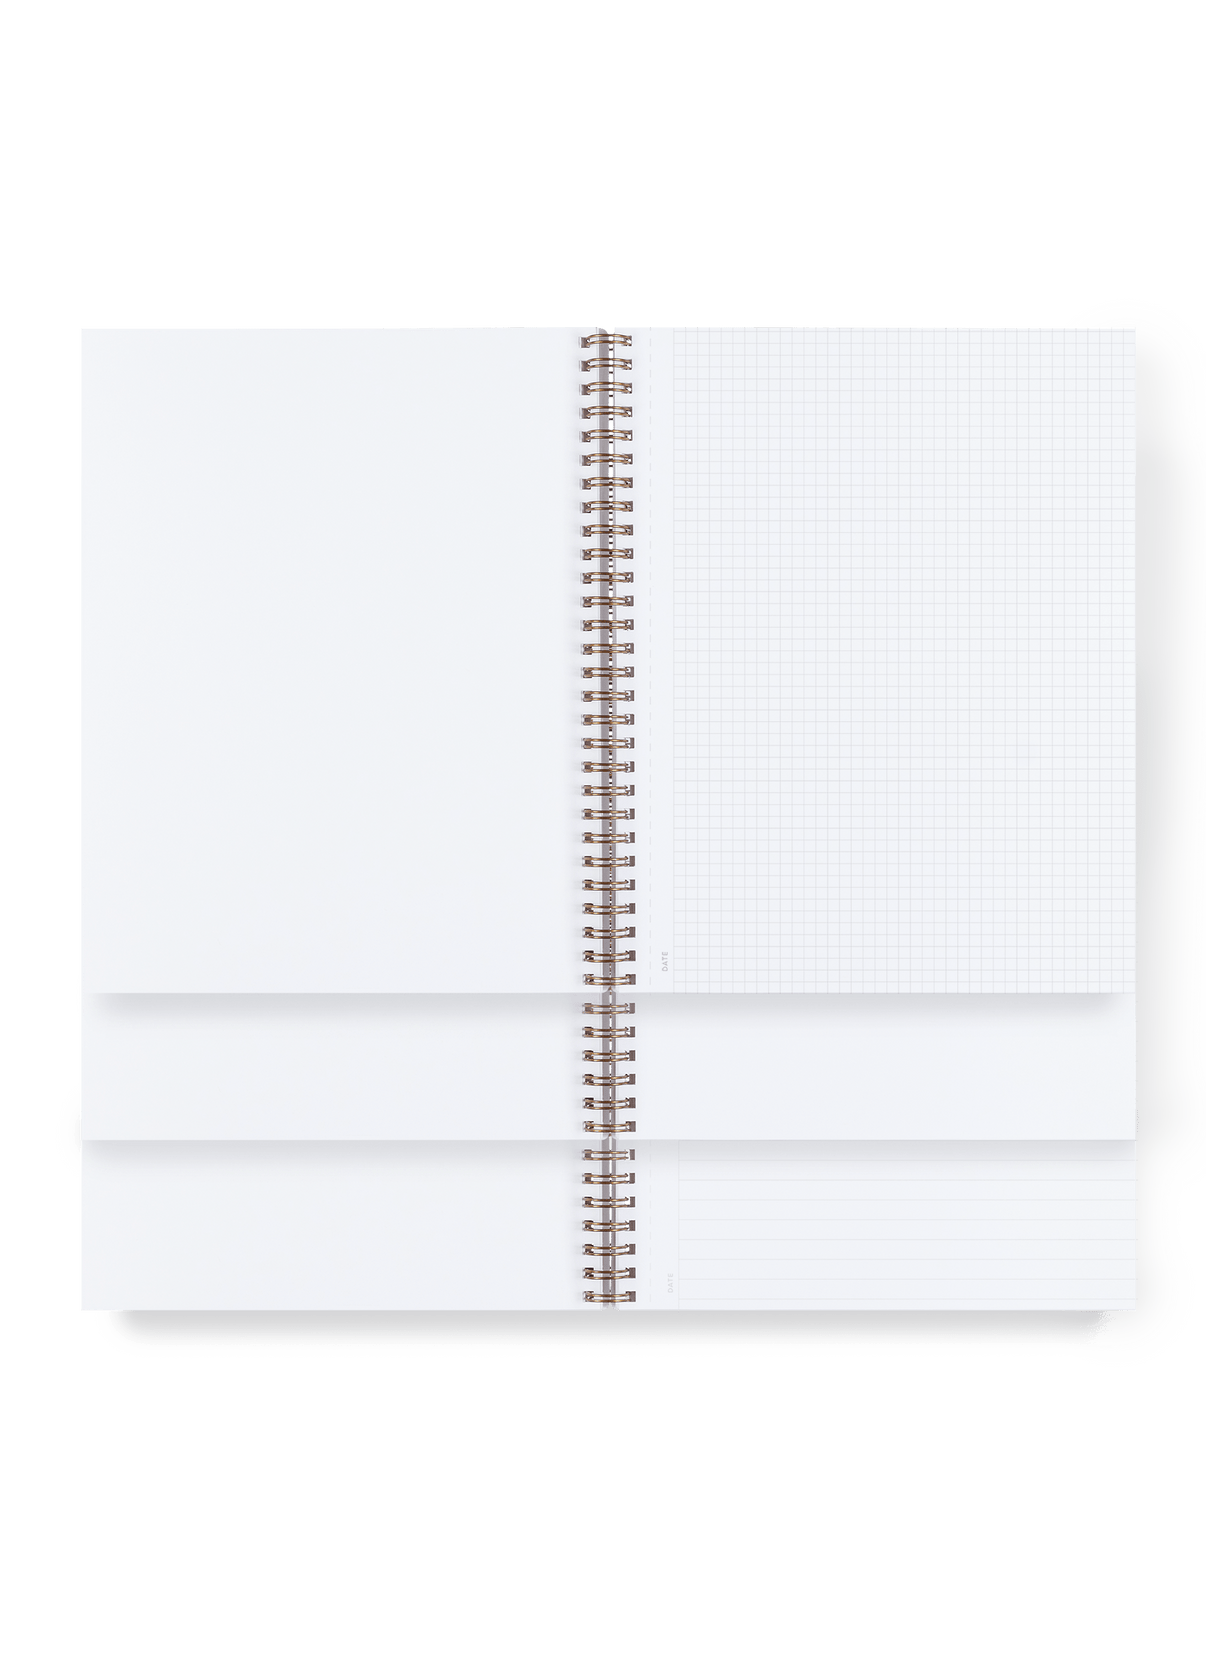 Appointed Notebook interior stacked - grid, blank and lined interiors